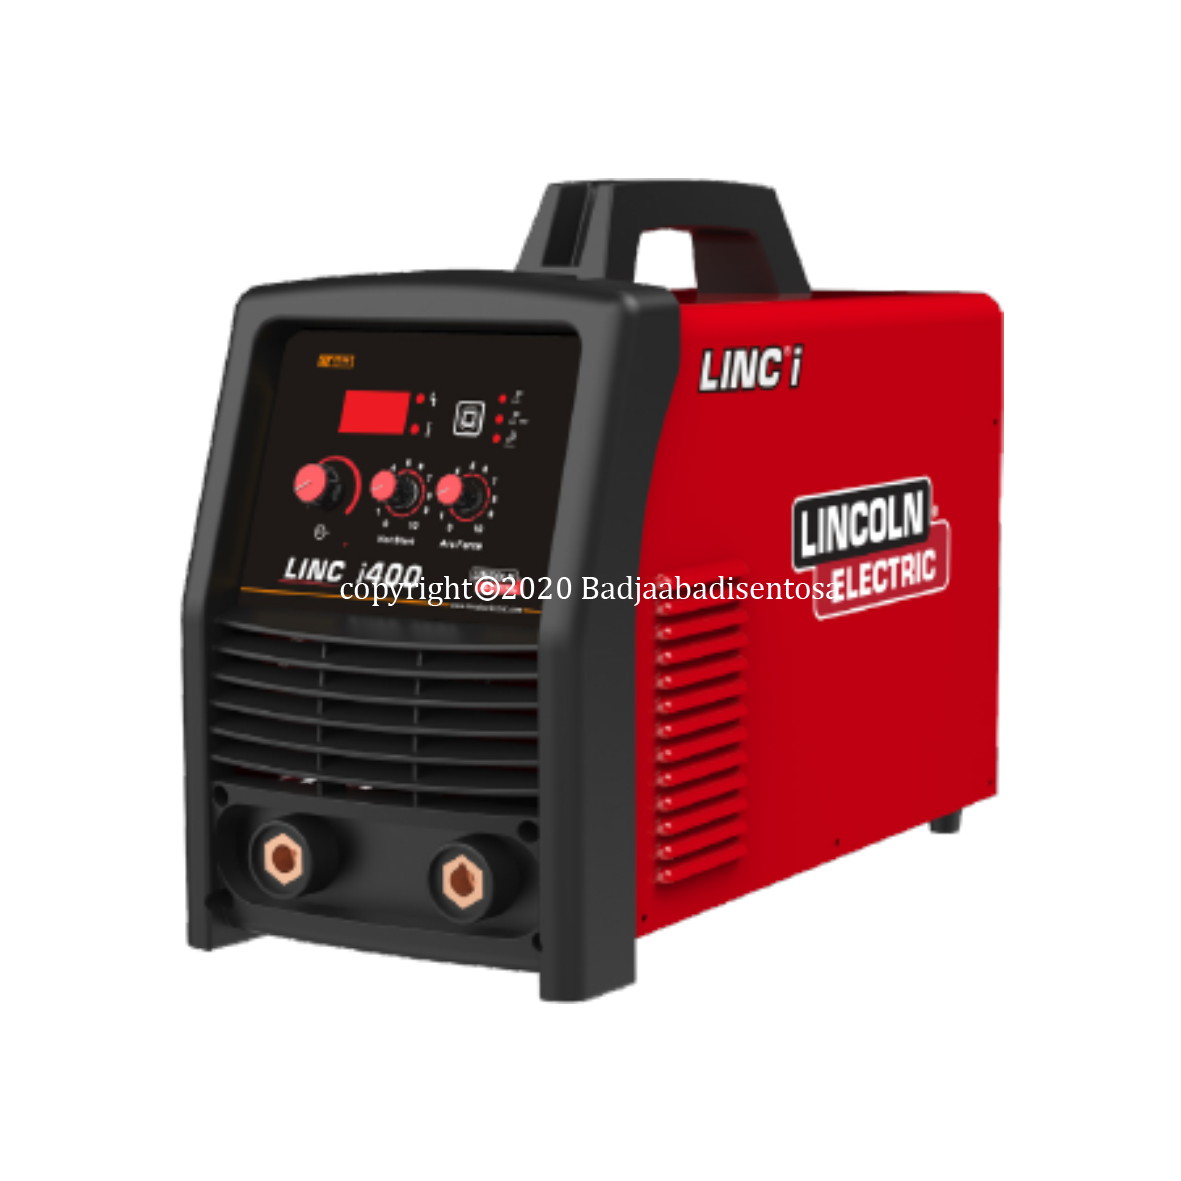 Lincoln Electric - Welding Equipment - Welding Machine i400 Lincoln Electric